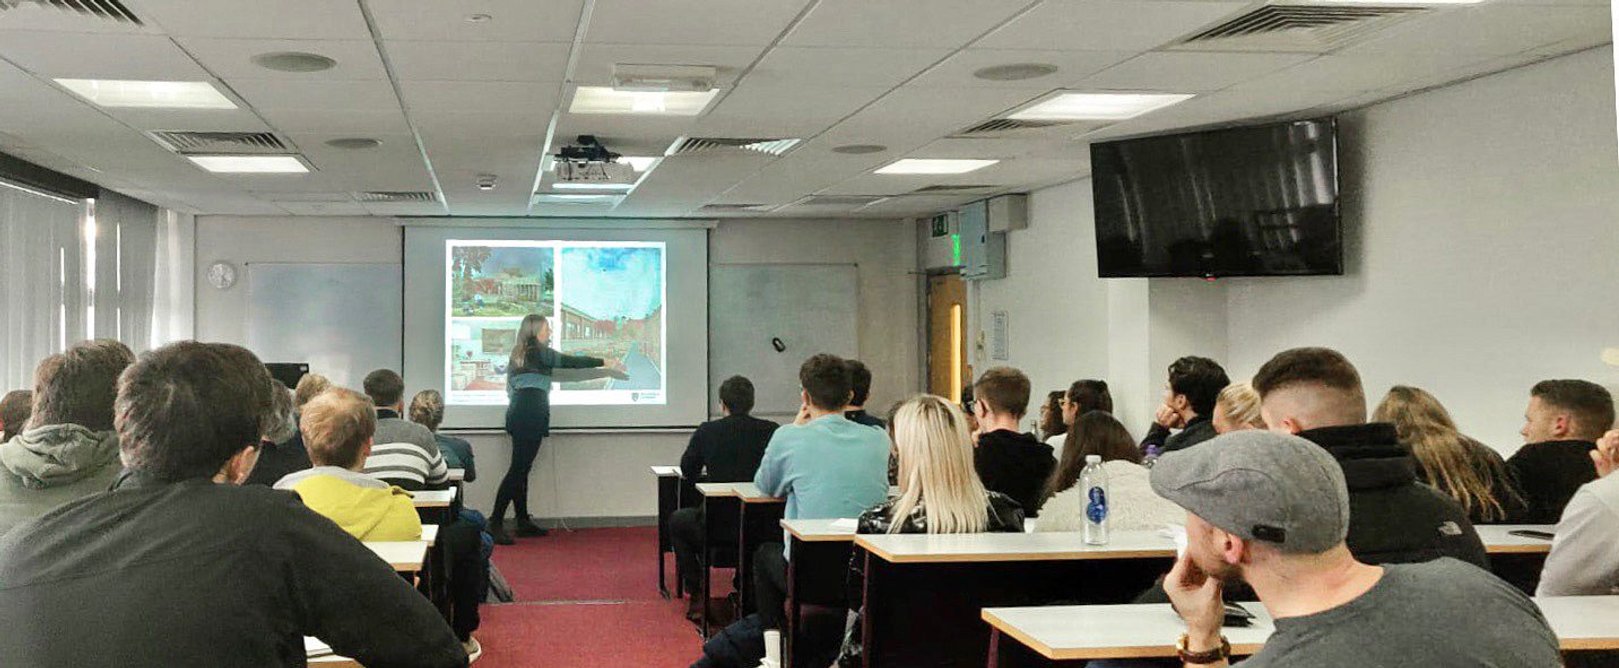 Giving a lecture on design communication to master architecture students at Northumbria University.